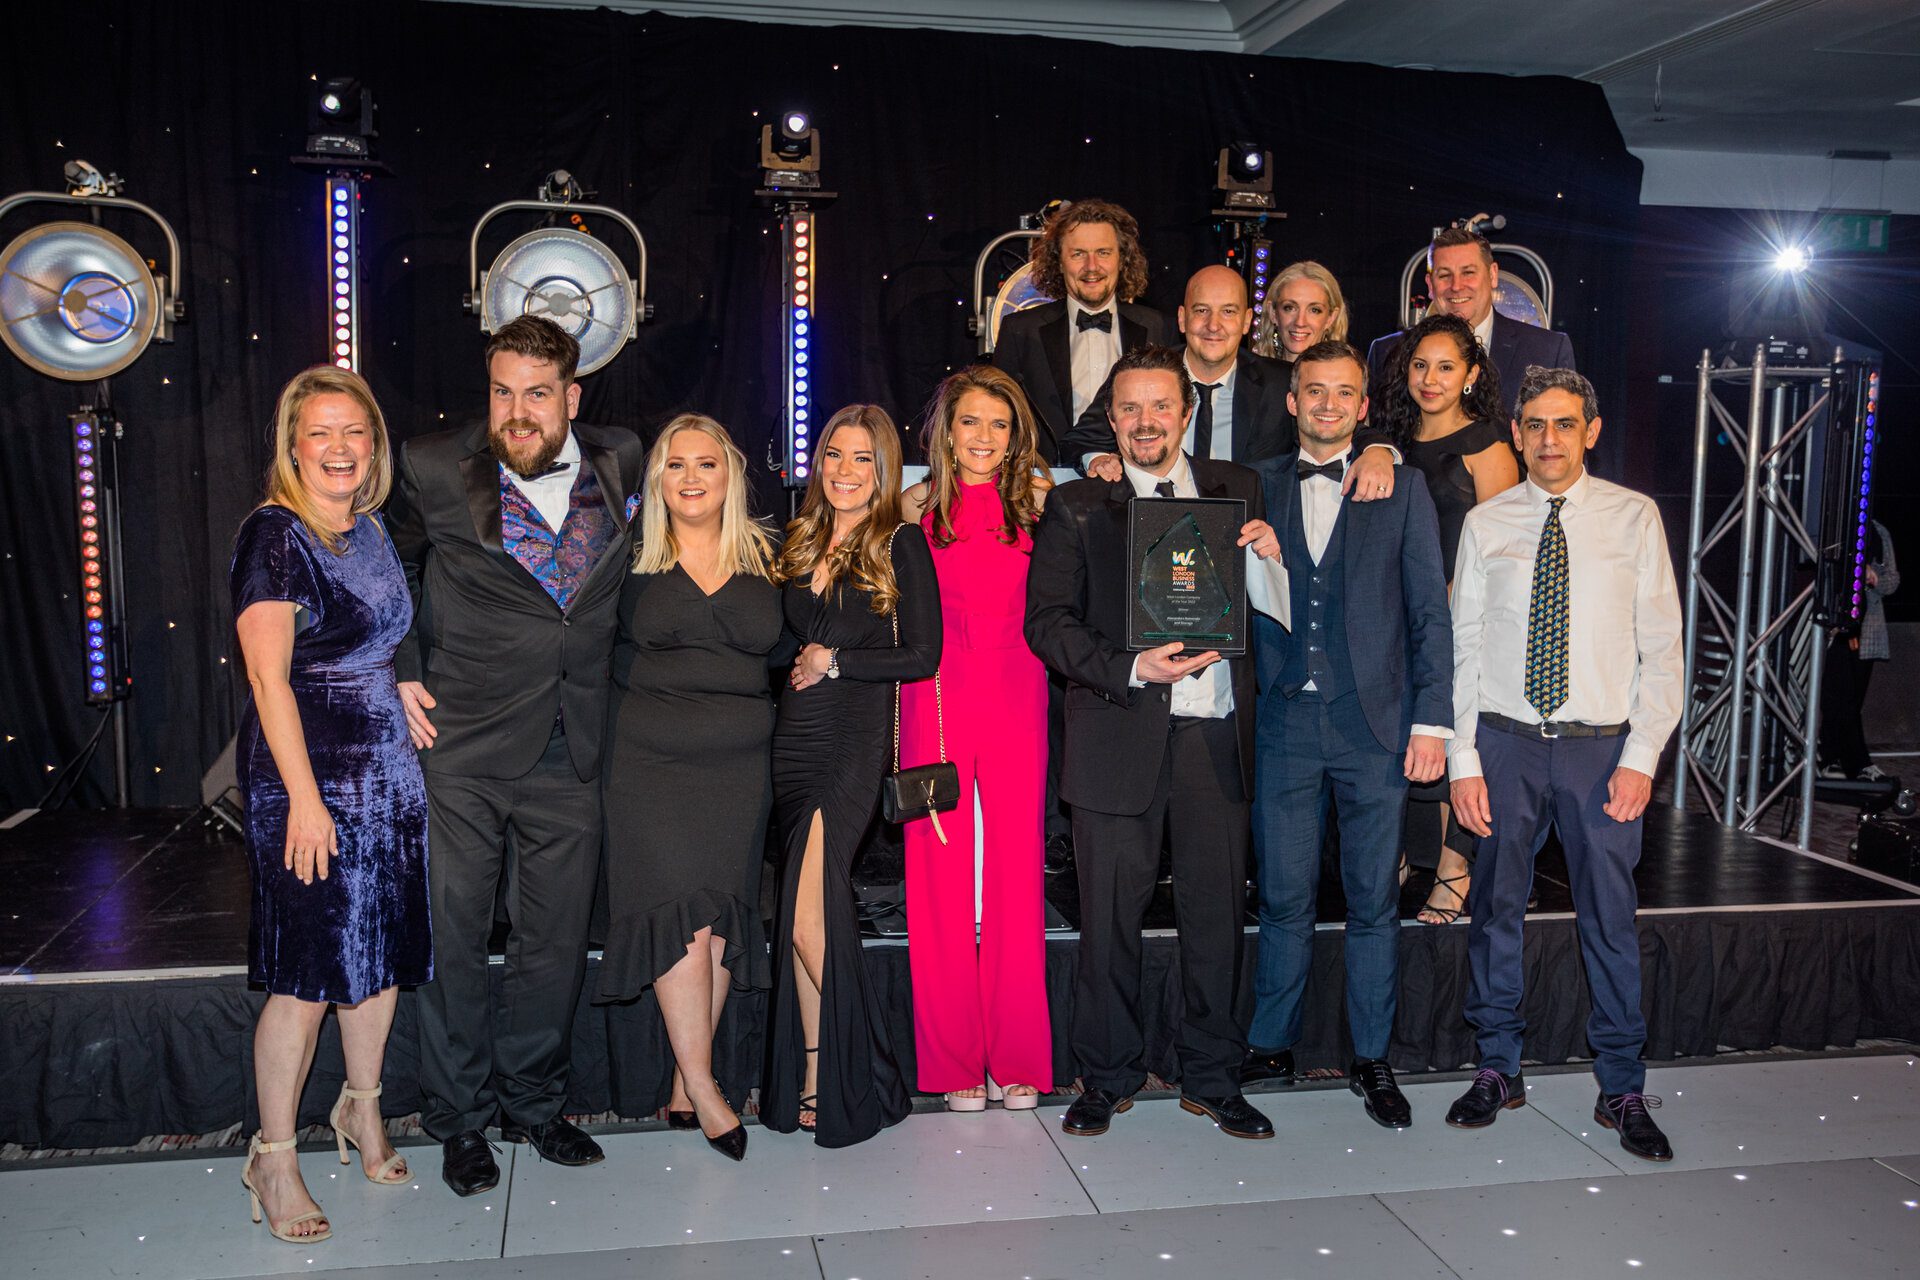 Alexanders named West London Company of the Year and wins 3 further awards